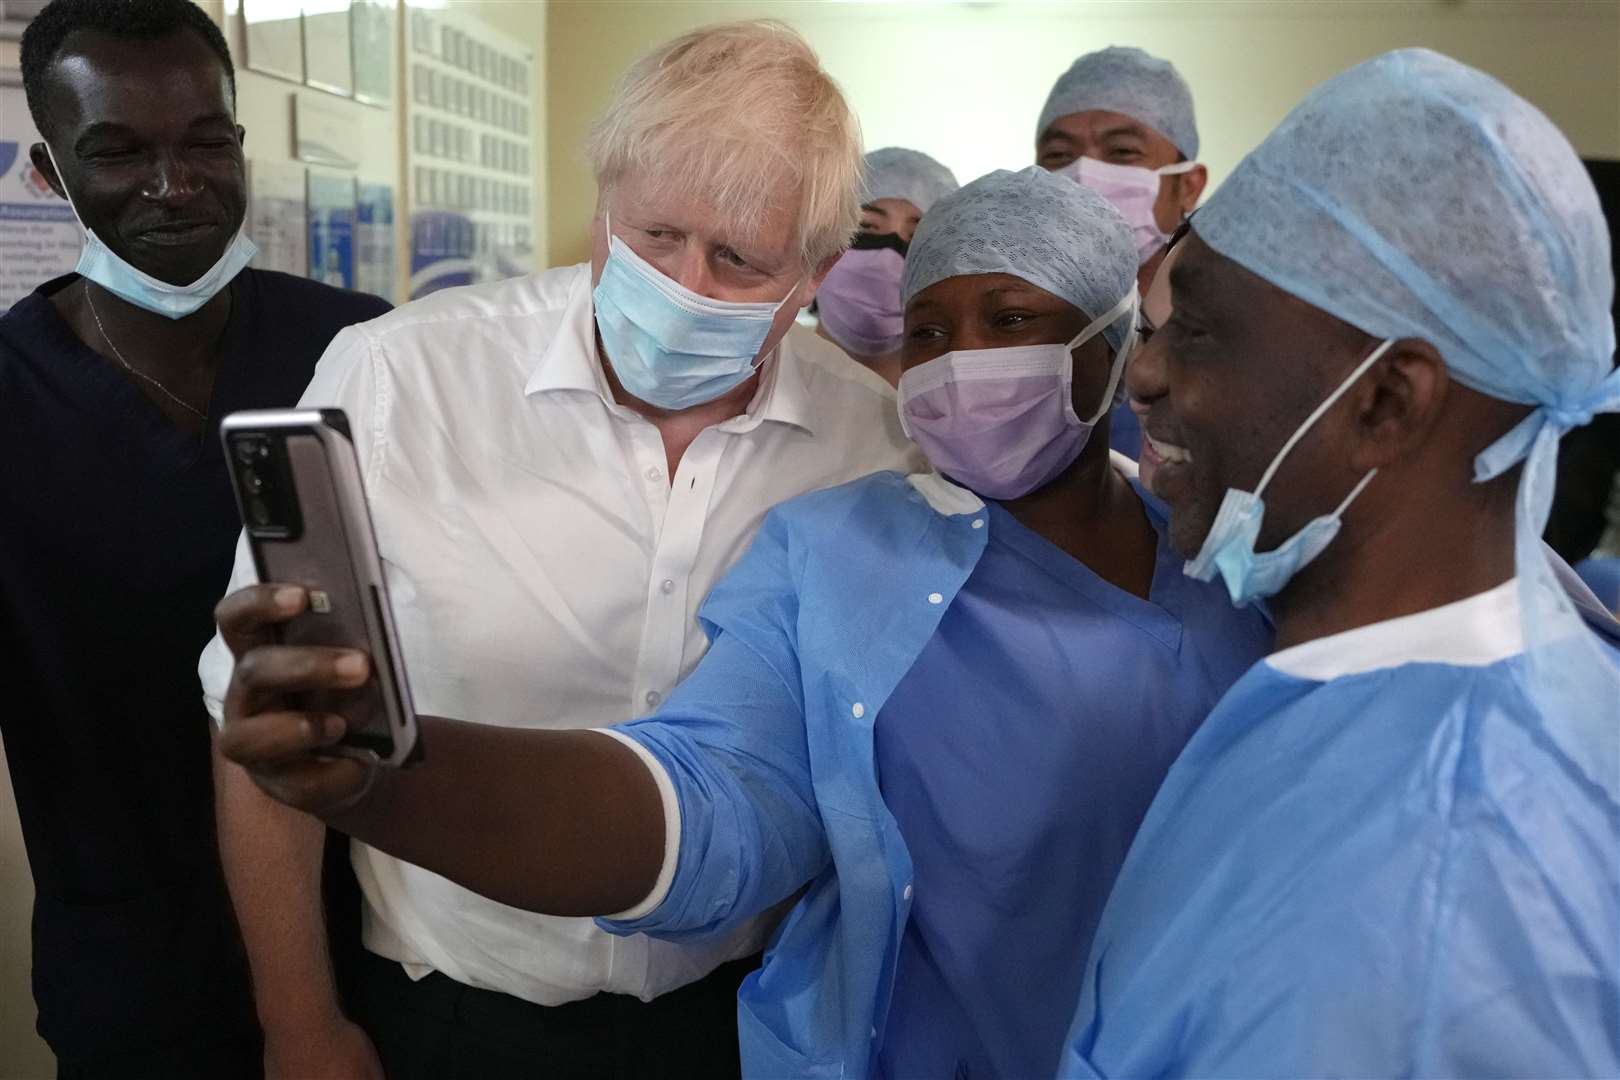 Prime Minister Boris Johnson posed for photographs as he met members of staff at the South West London Elective Orthopaedic Centre on Friday (Kirsty Wigglesworth/PA)